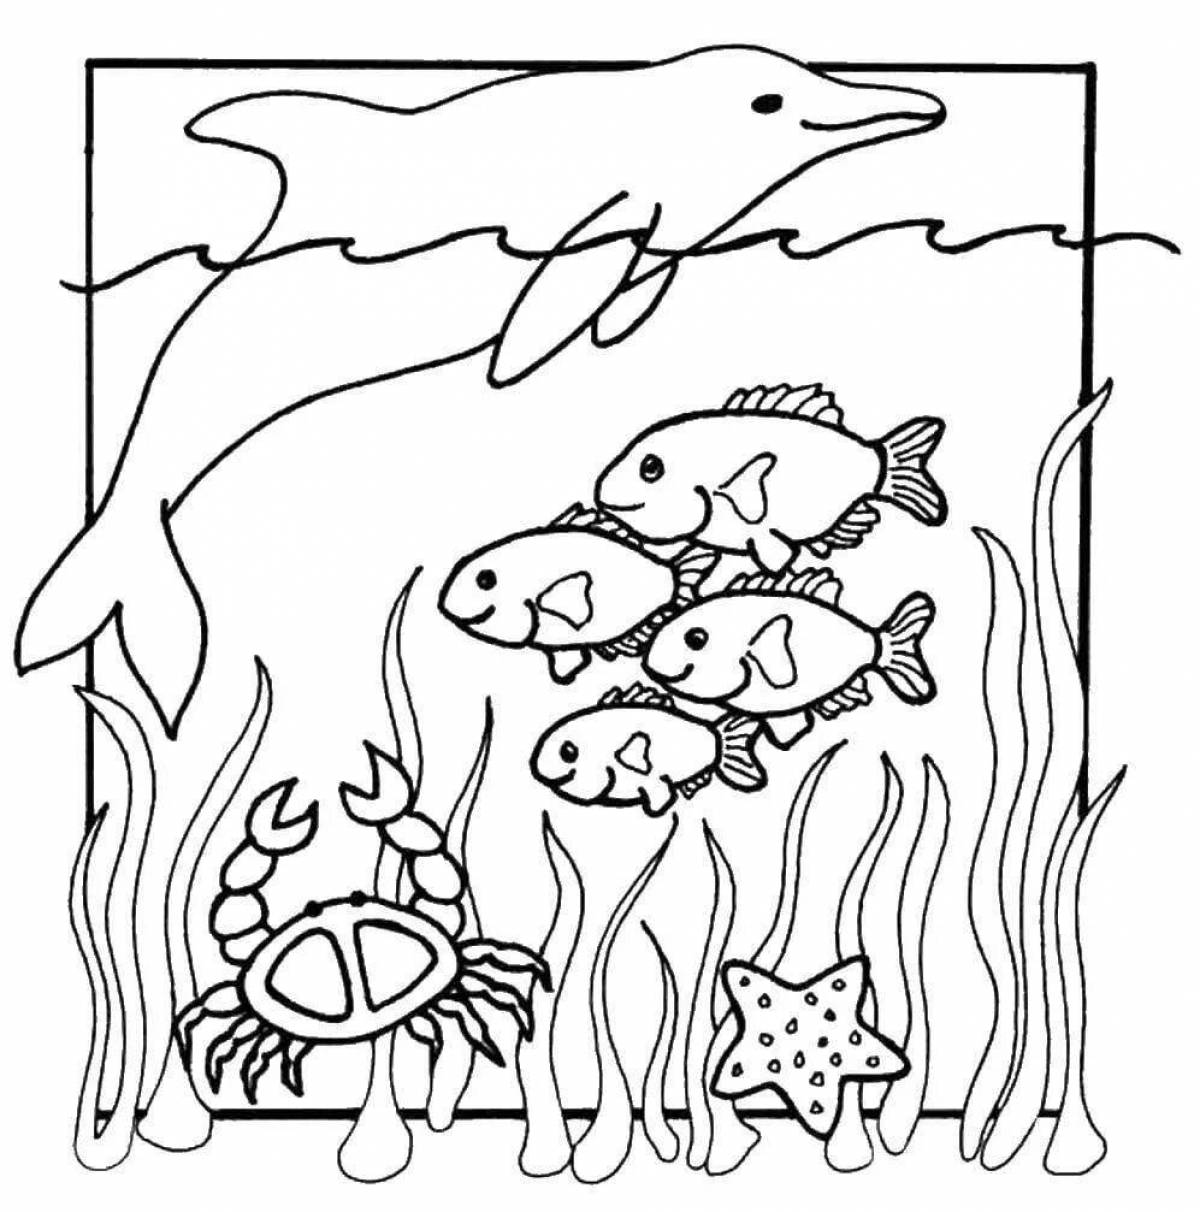 Majestic marine life coloring pages